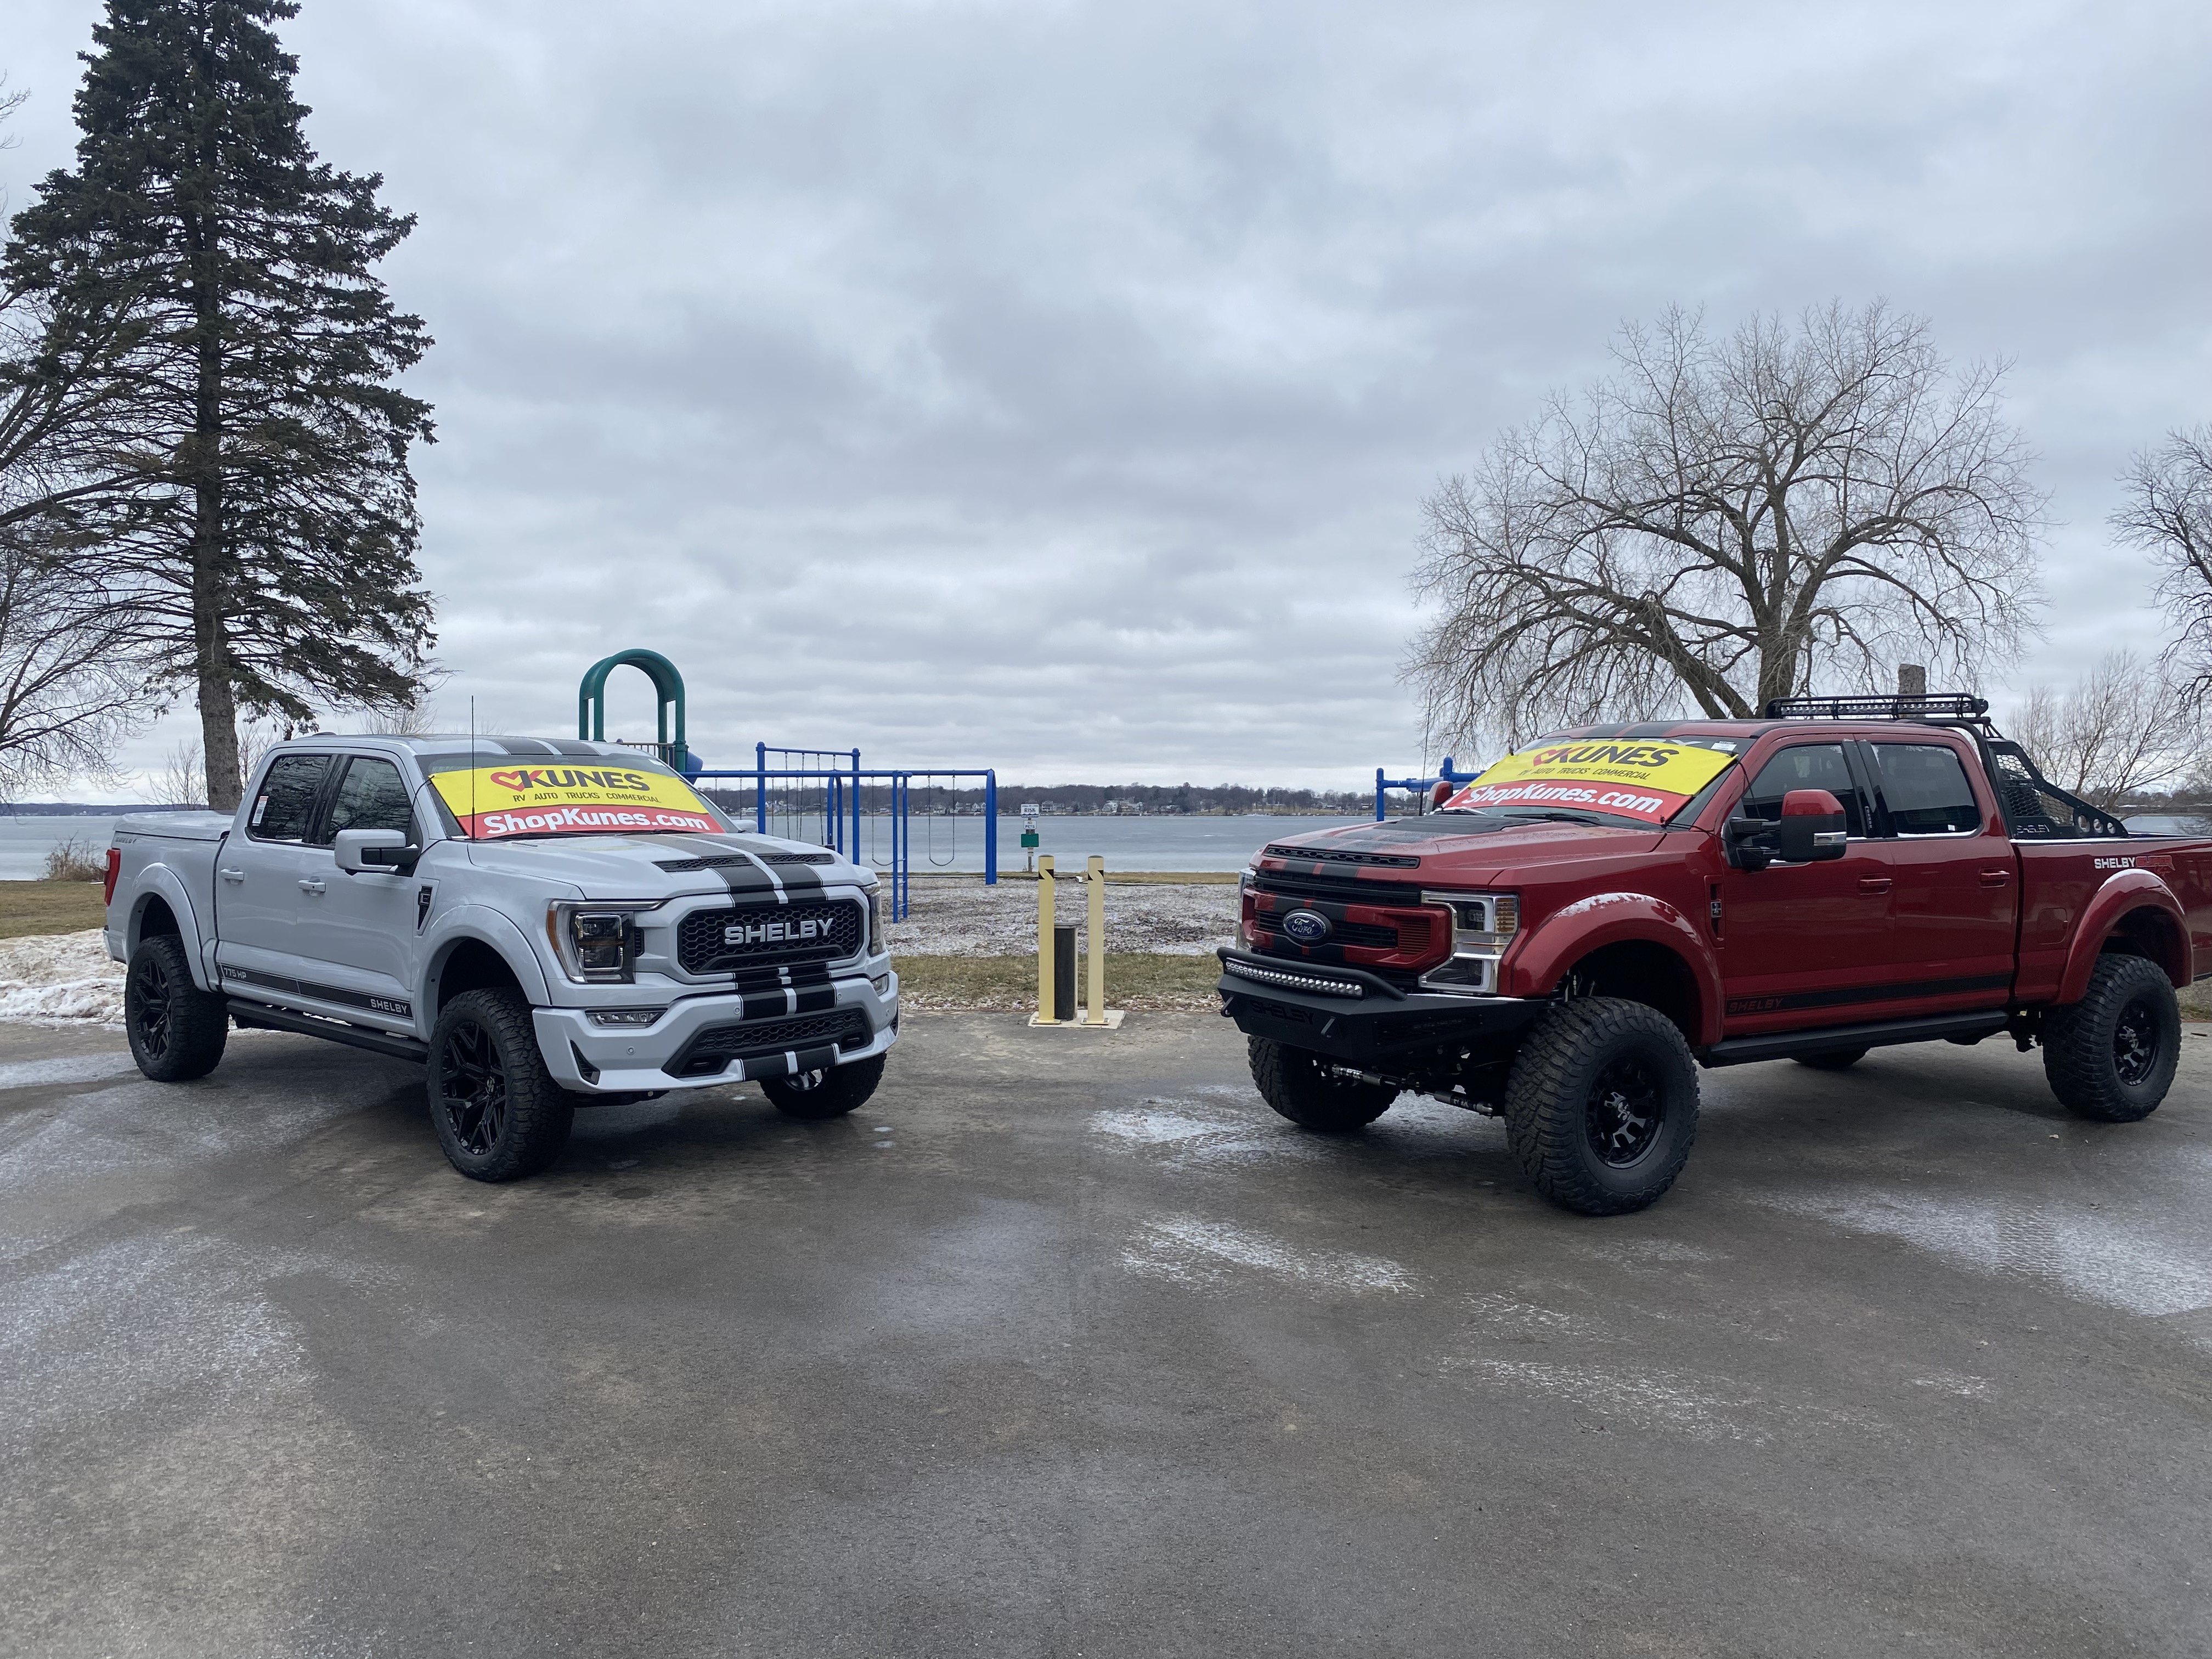 Two Kunes trucks posing in front of playground with Delavan Lake in the background